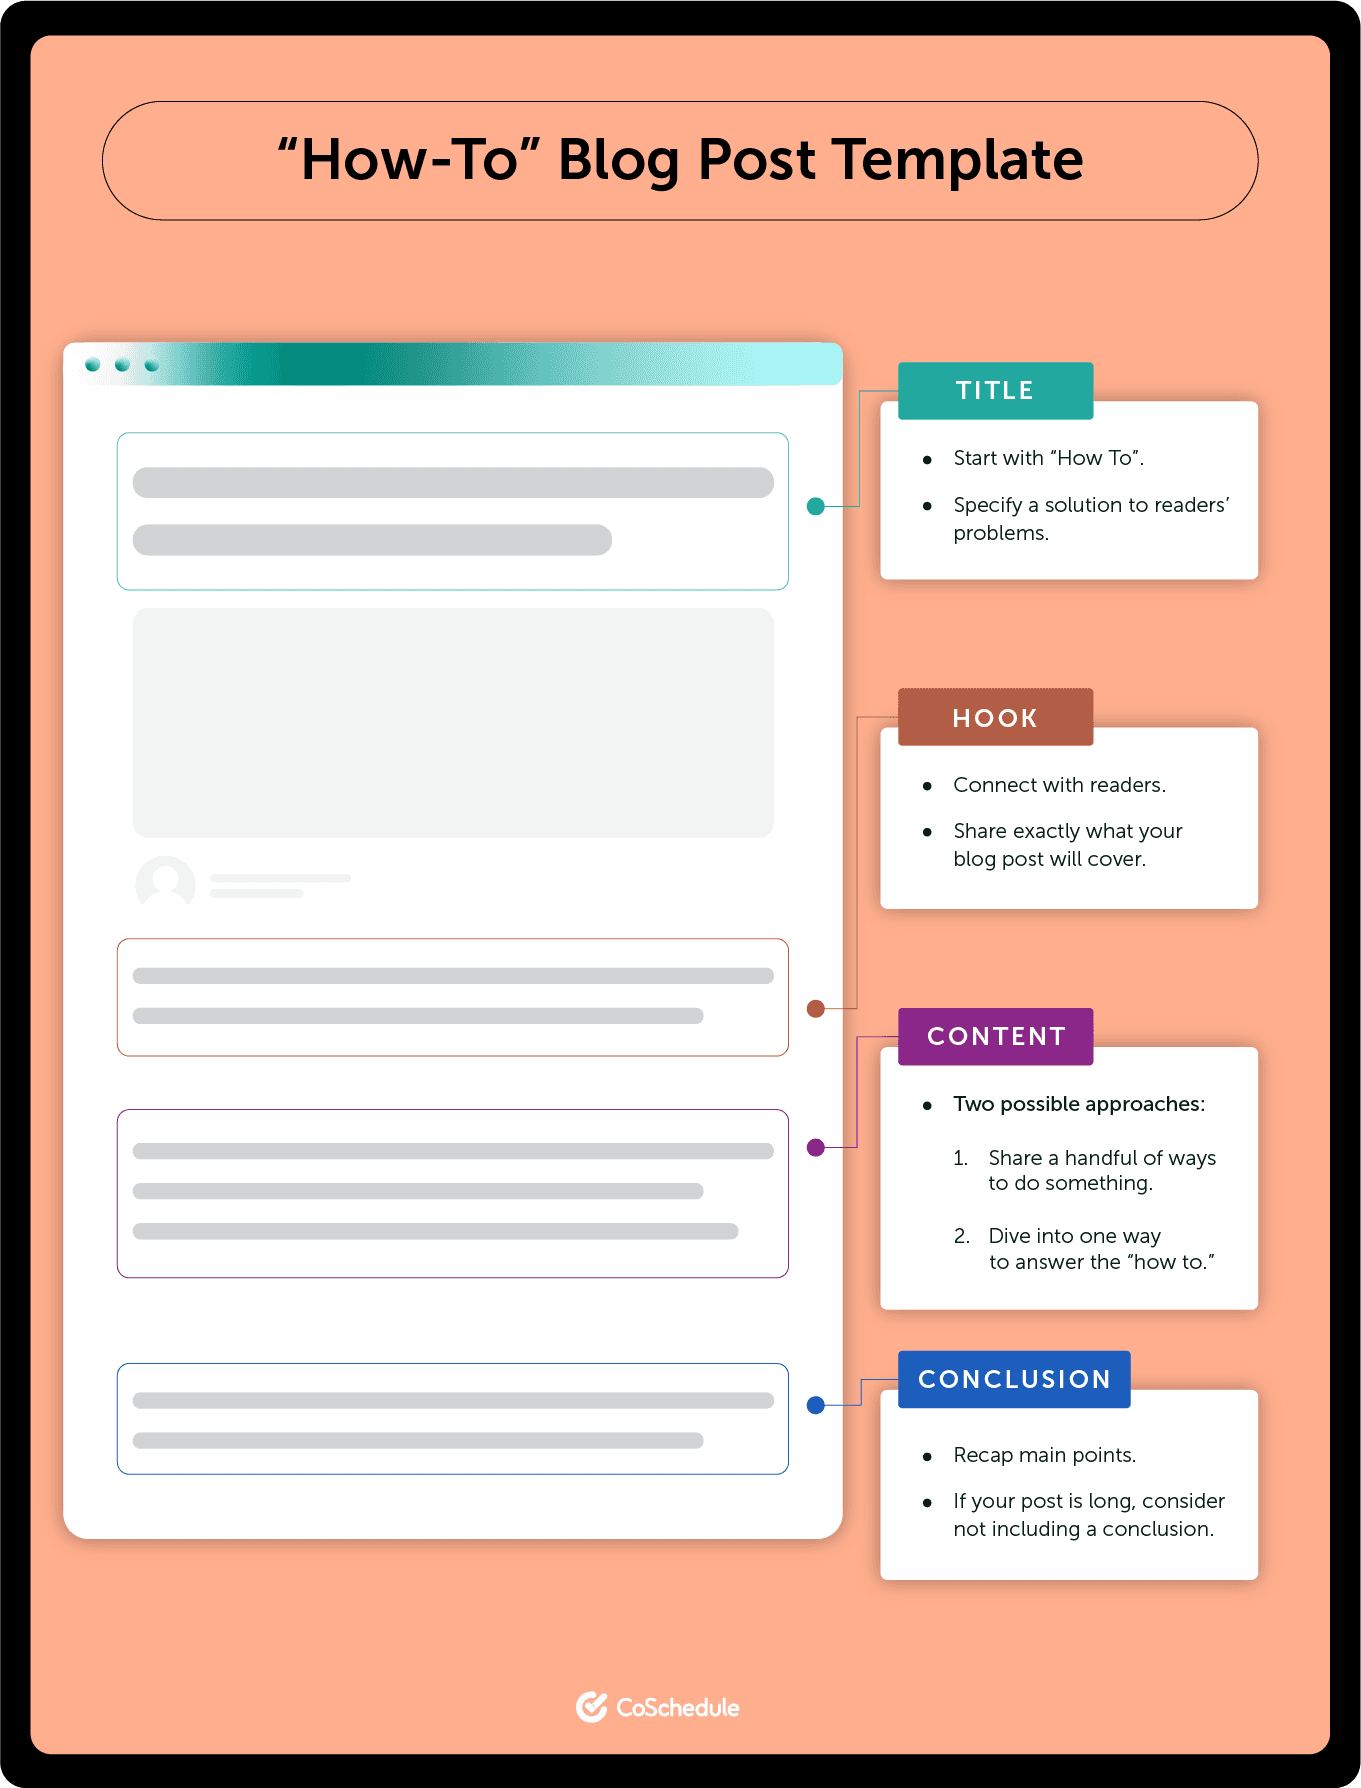 "How-to" blog post template, and how to design it